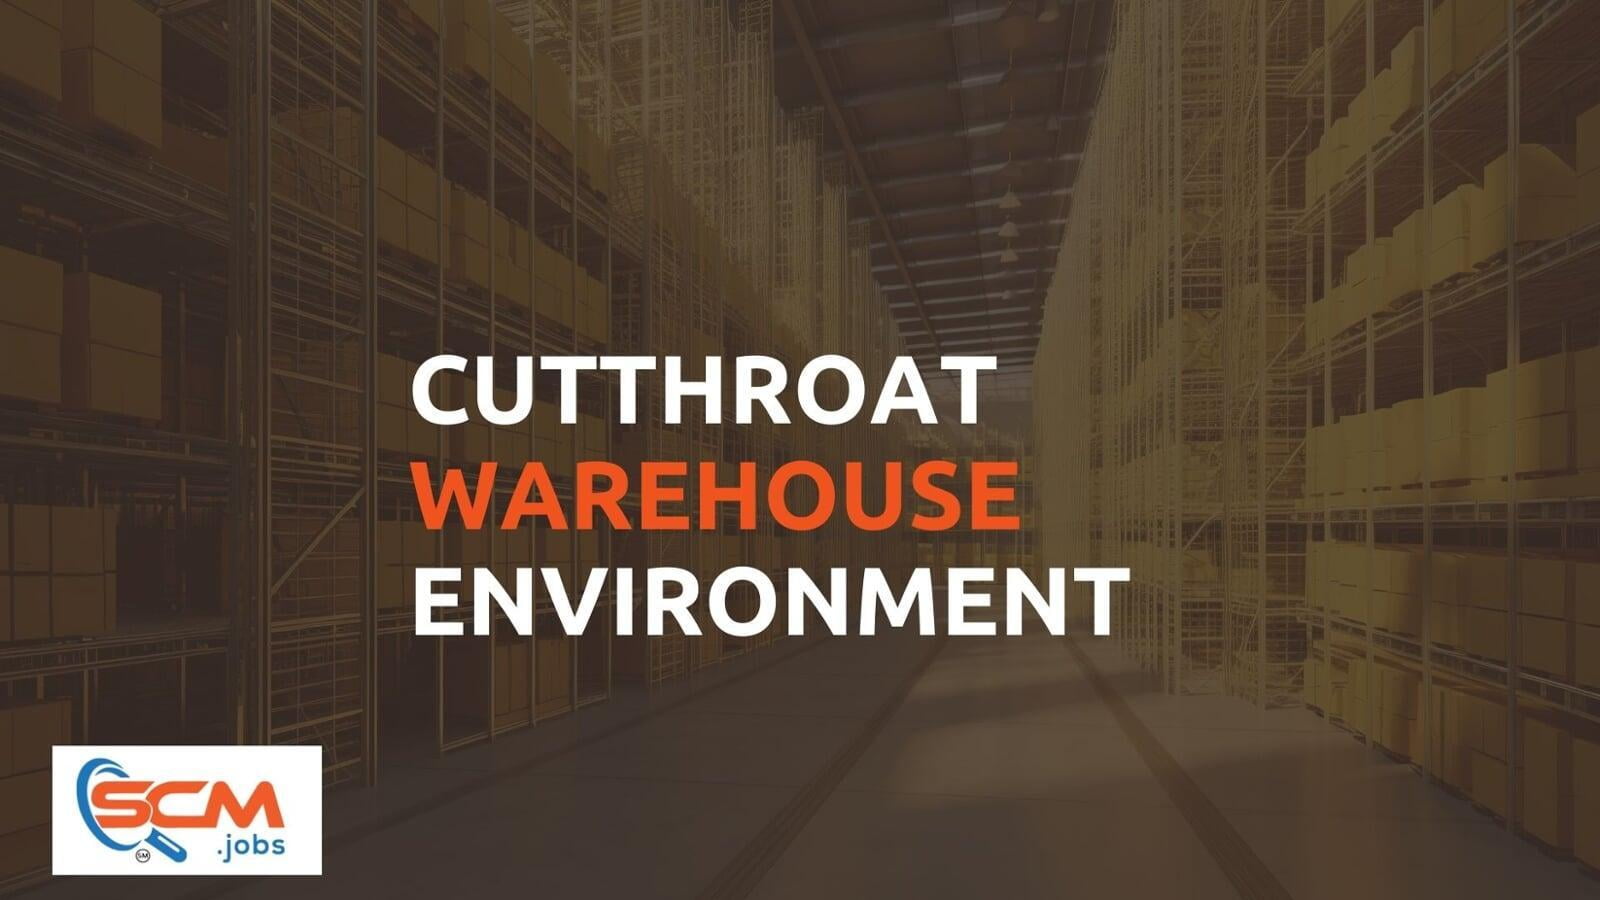 How to Succeed in Today's Cutthroat Warehouse Environment